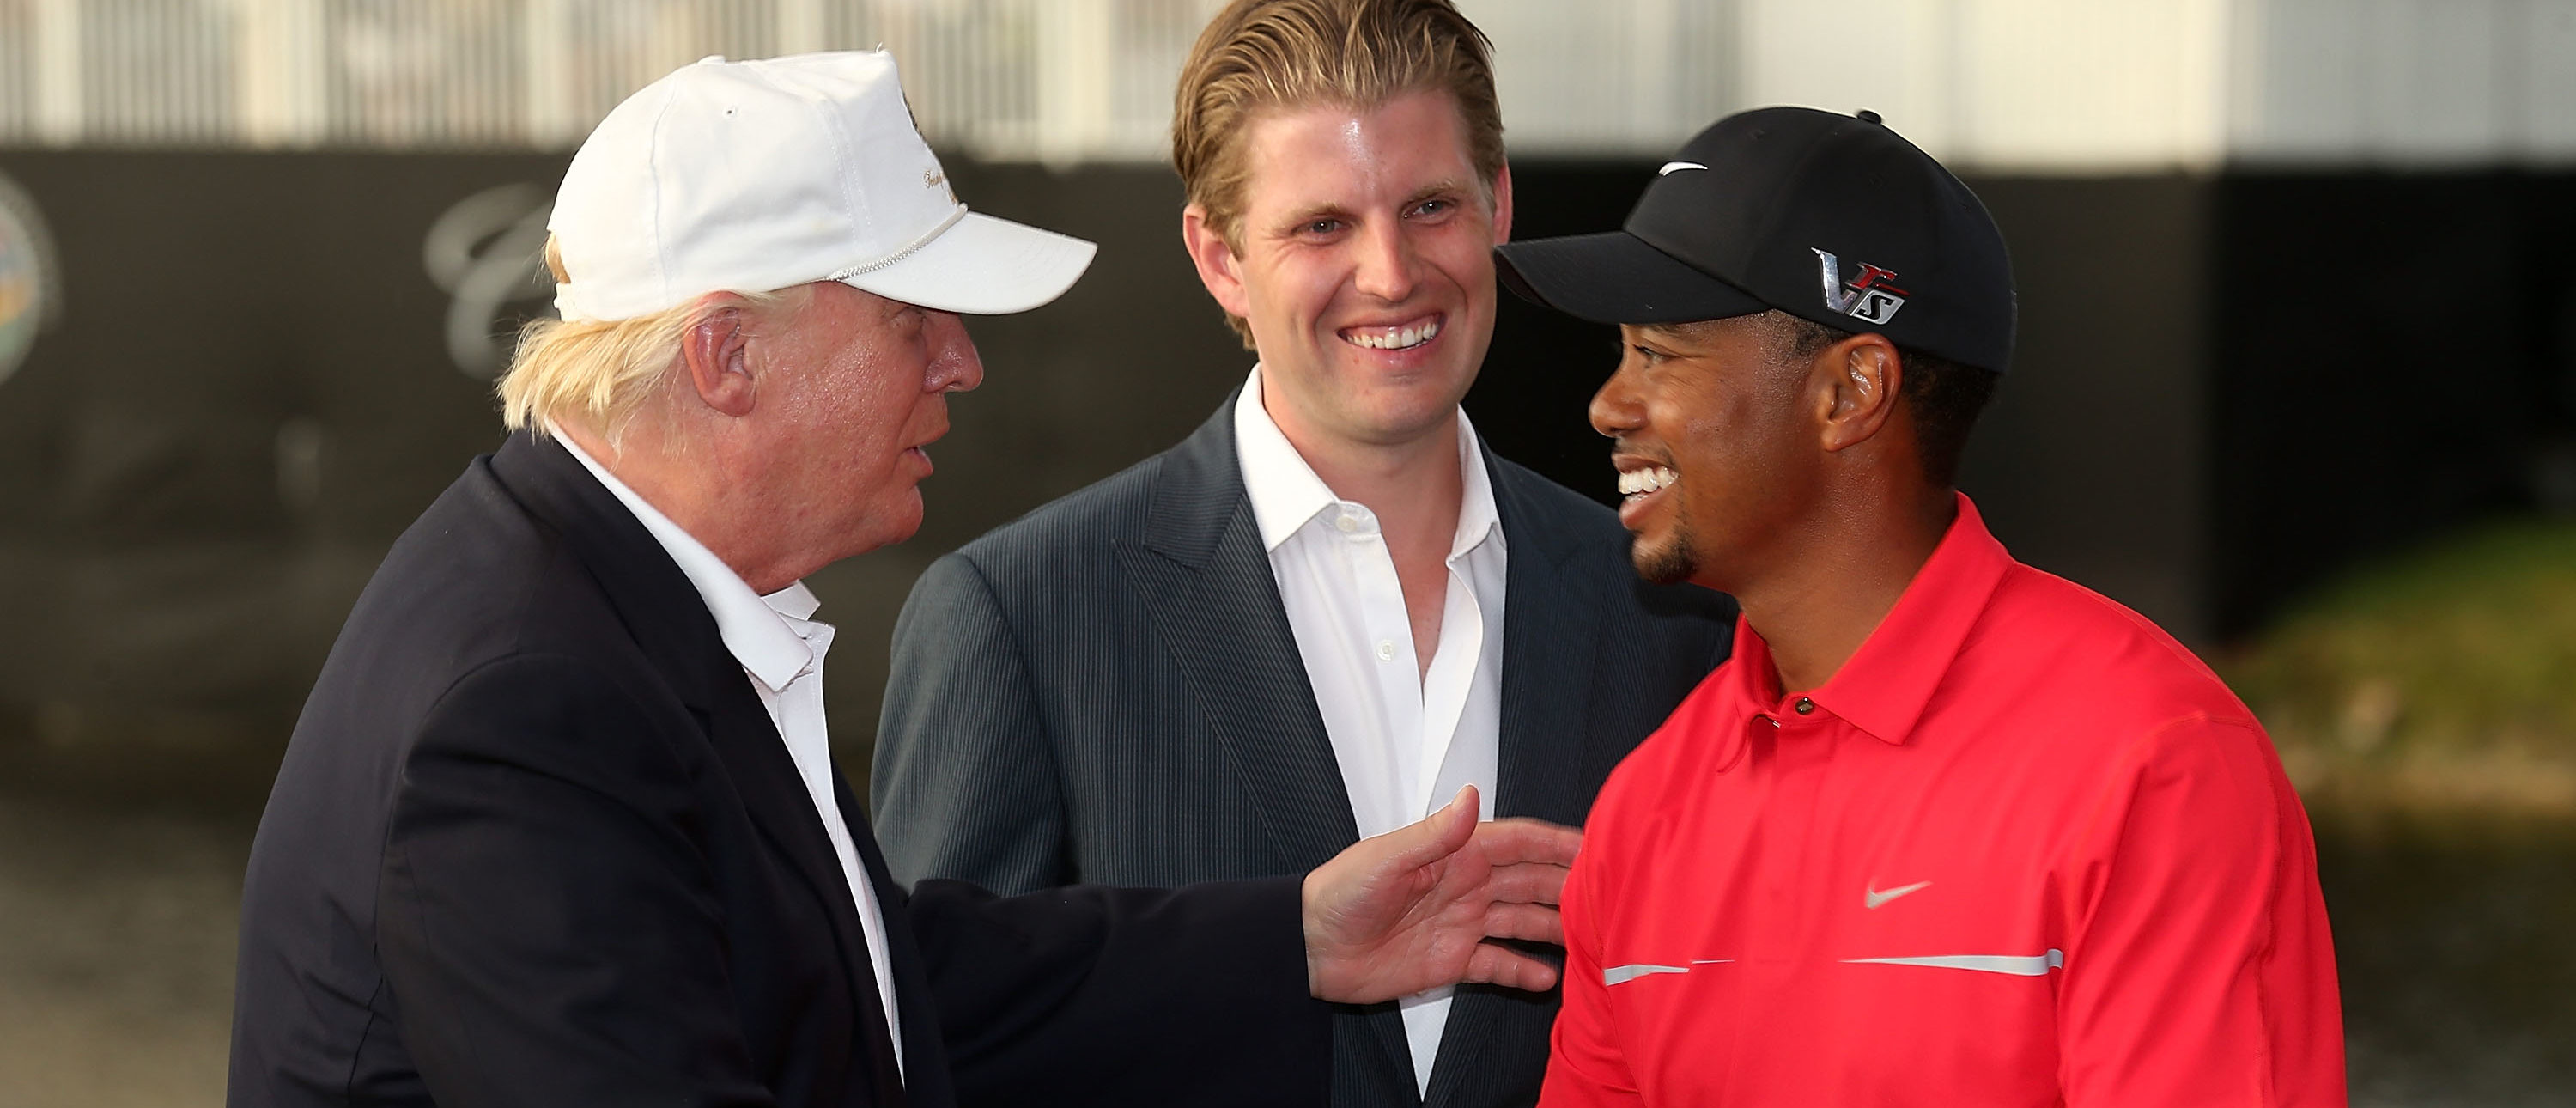 DORAL, FL - MARCH 10: Developer Donald Trump (L) greets Tiger Woods after the final round of the World Golf Championships-Cadillac Championship as Eric Trump looks on at the Trump Doral Golf Resort & Spa on March 10, 2013 in Doral, Florida. (Photo by Warren Little/Getty Images)